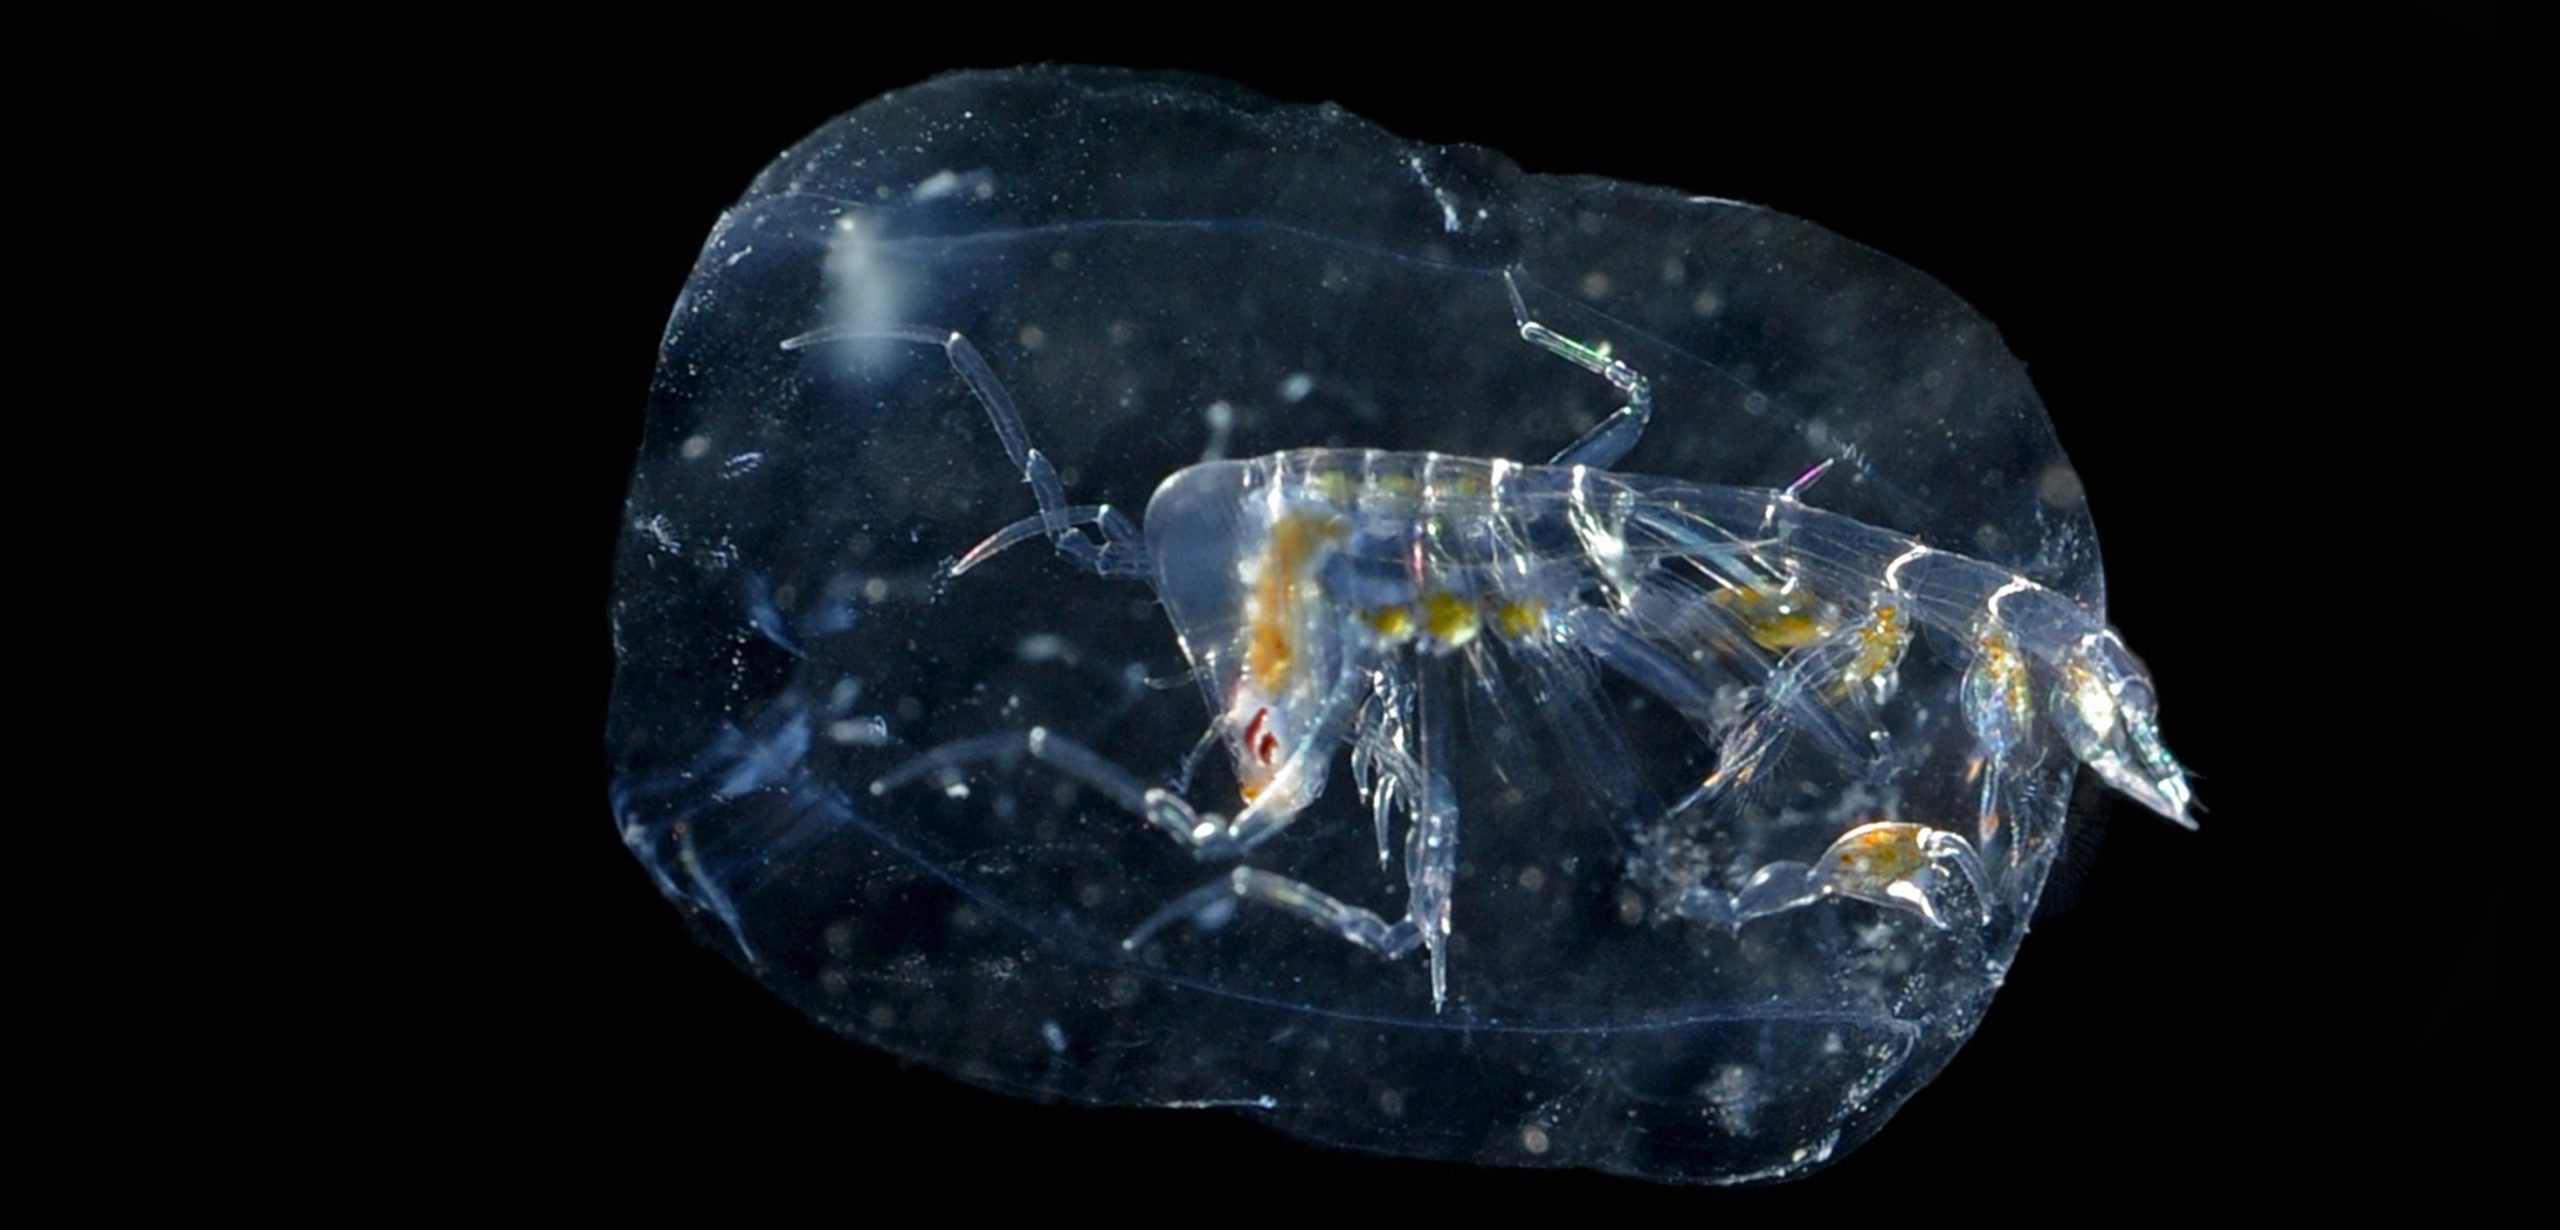 Planktonic marine organisms are important to all of life on Earth. They vary mightily in shape and size: the microscopic hyperiid amphipod, for example, looks like a monster trapped in a gelatinous barrel. Photo by Sonke Johnsen/Visuals Unlimited/Corbis